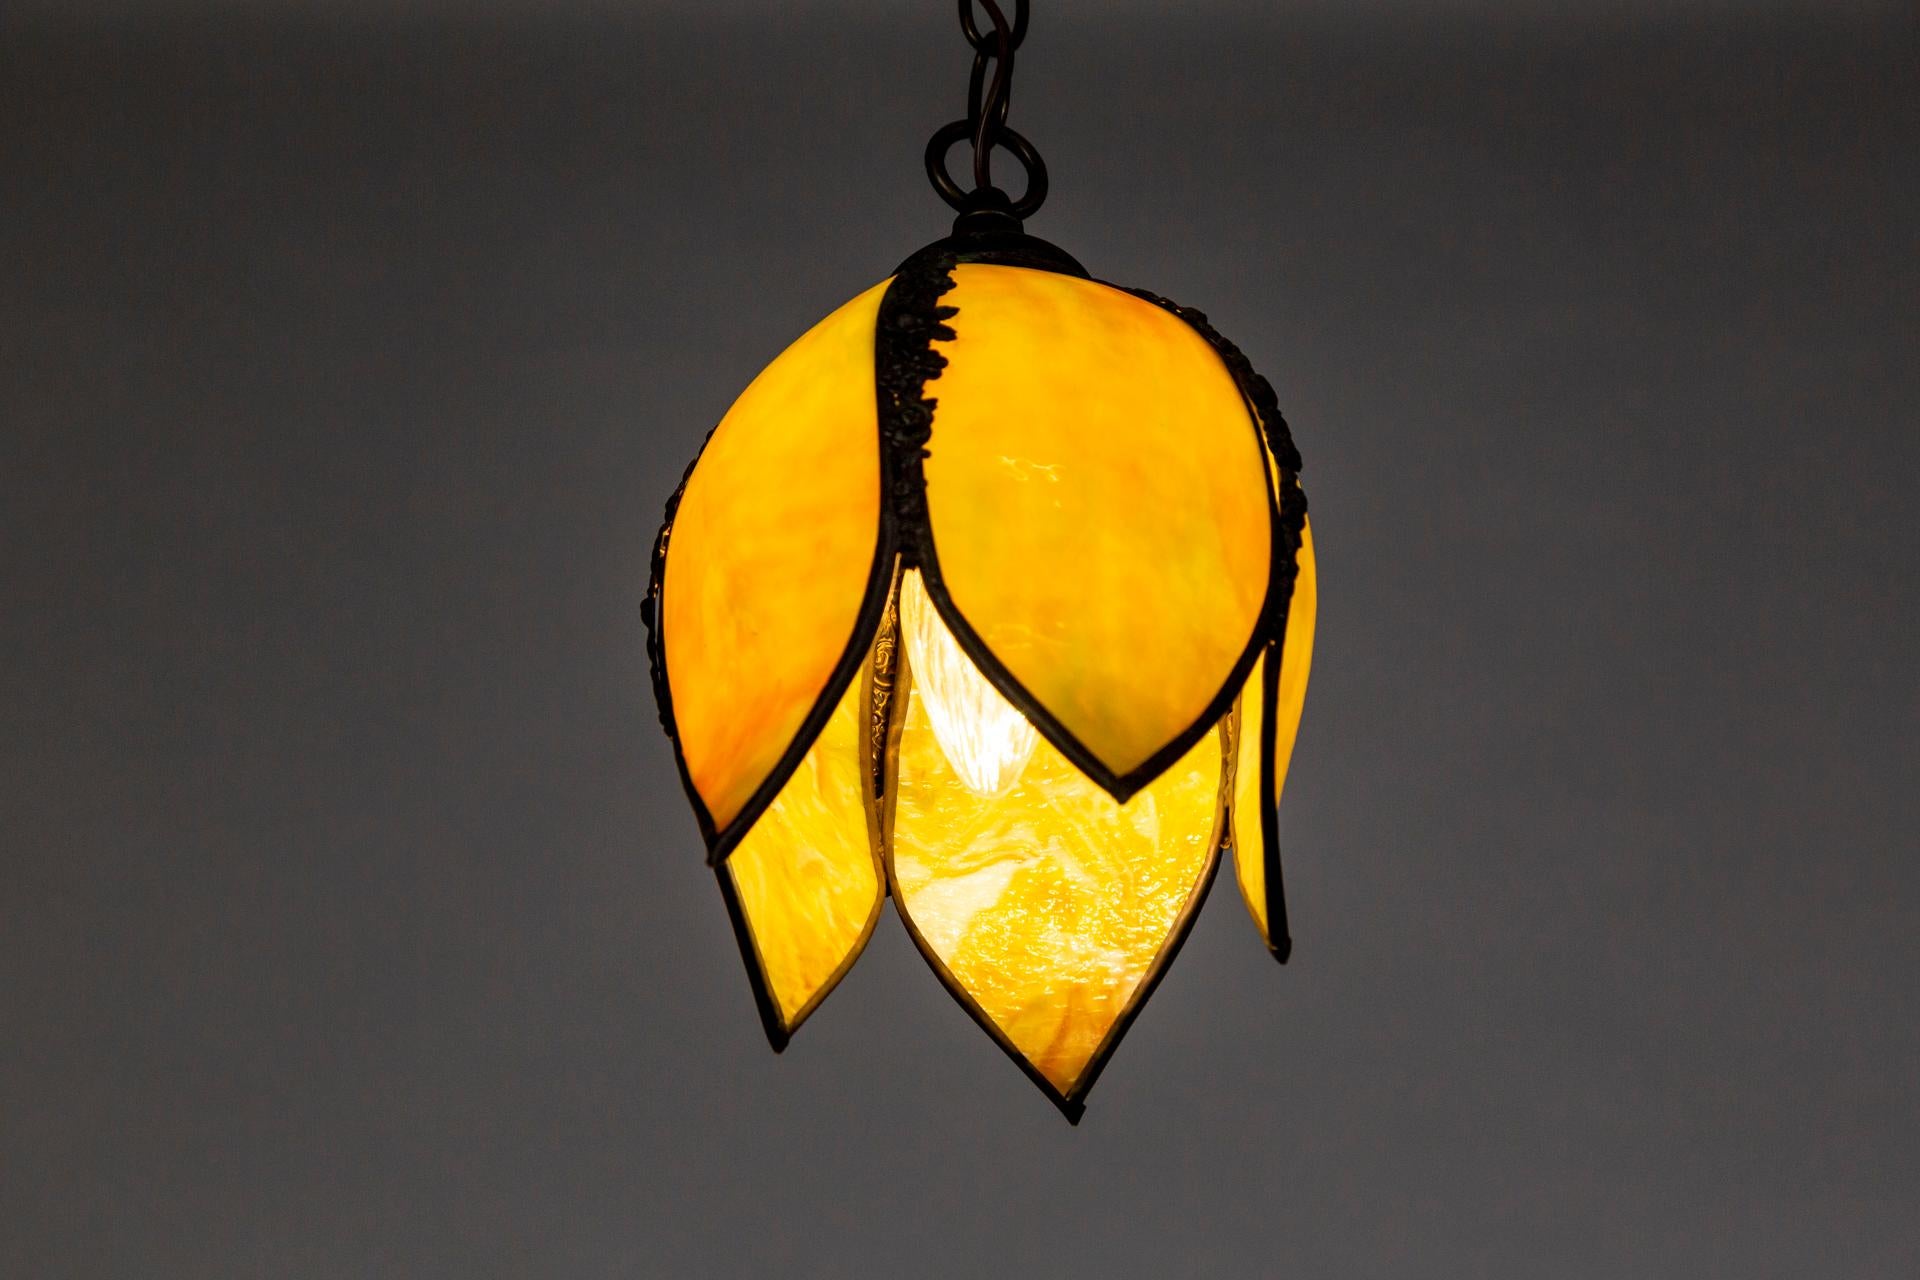 A petite, chartreuse, slag glass hanging light in a tulip shape. It changes to a yellow tone when lit. The 5 petals are lined with floral, cast metal trim in a dark patina. With a new, darkened brass chain and canopy. Mid-20th century. Newly wired.